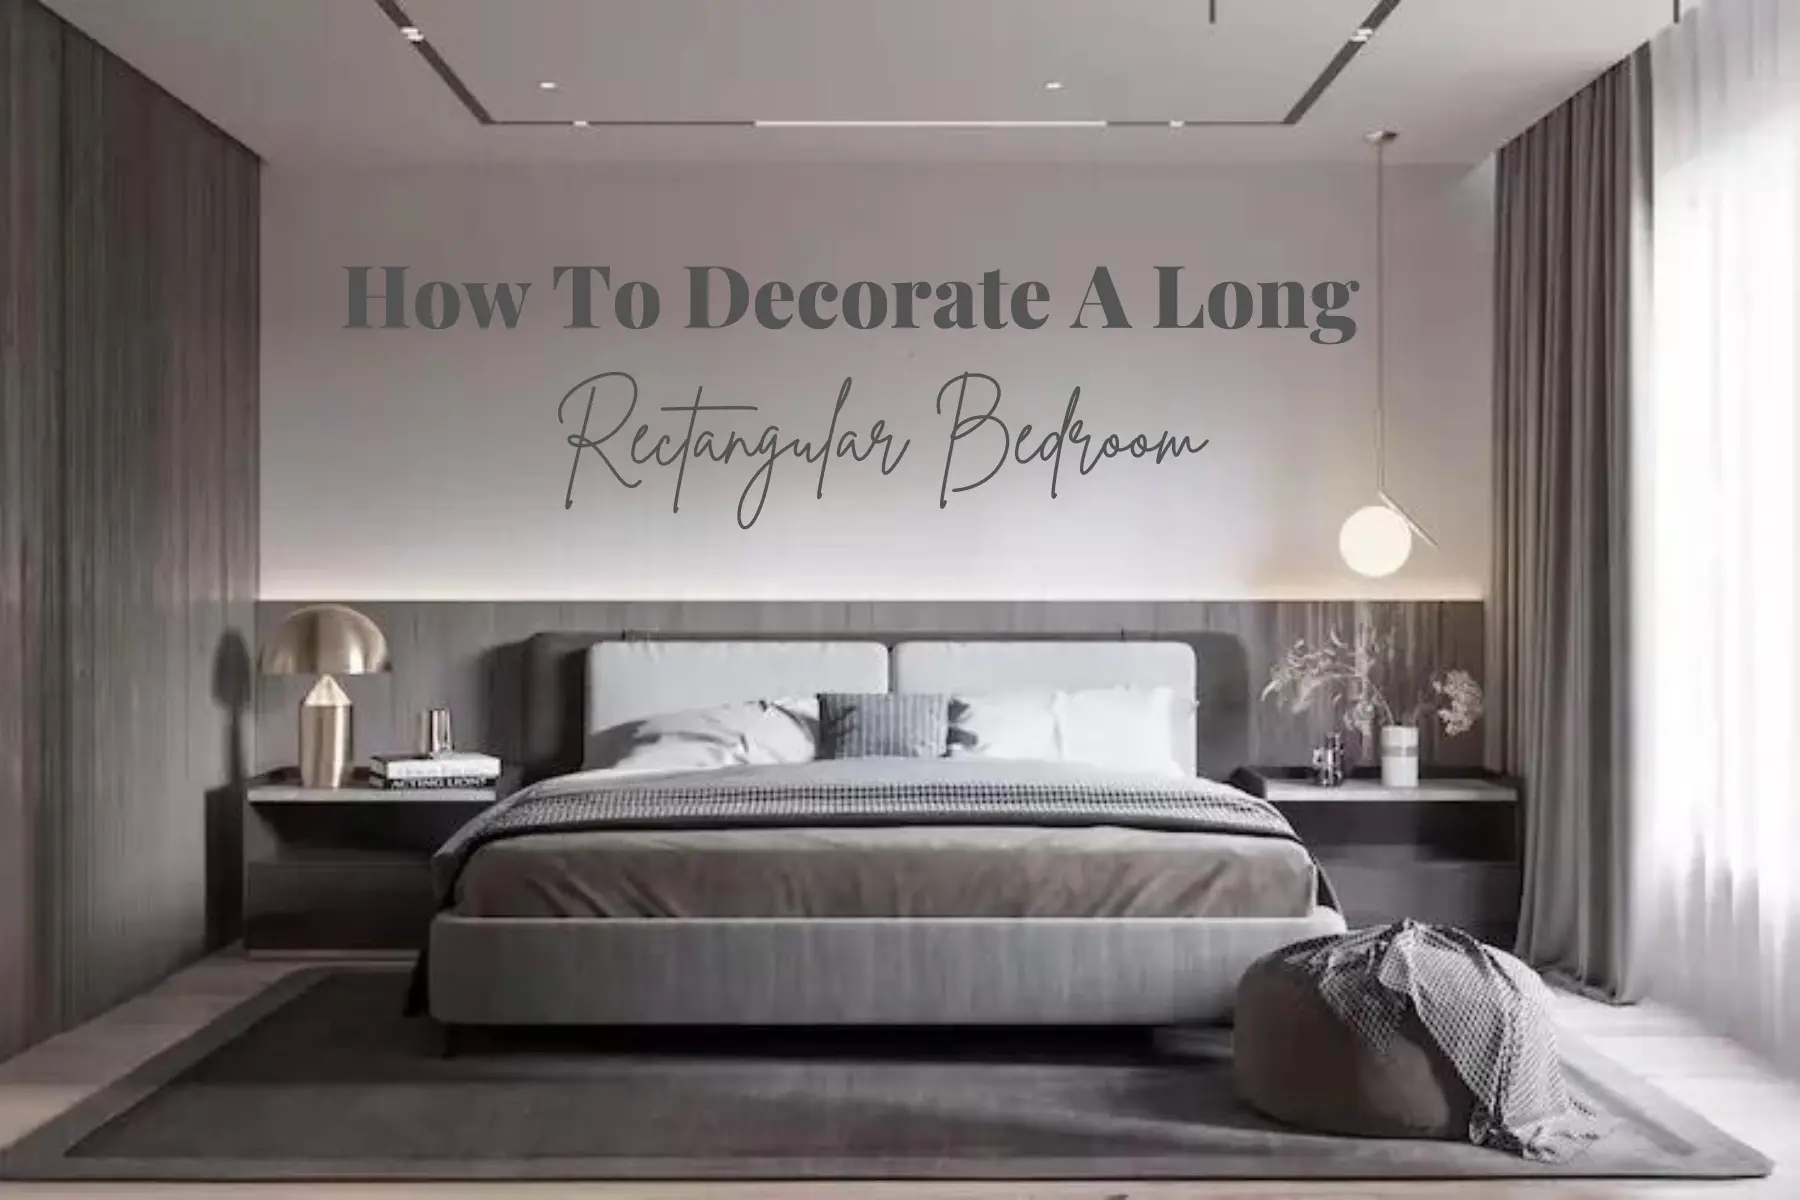 How to decorate a long Rectangular Bedroom